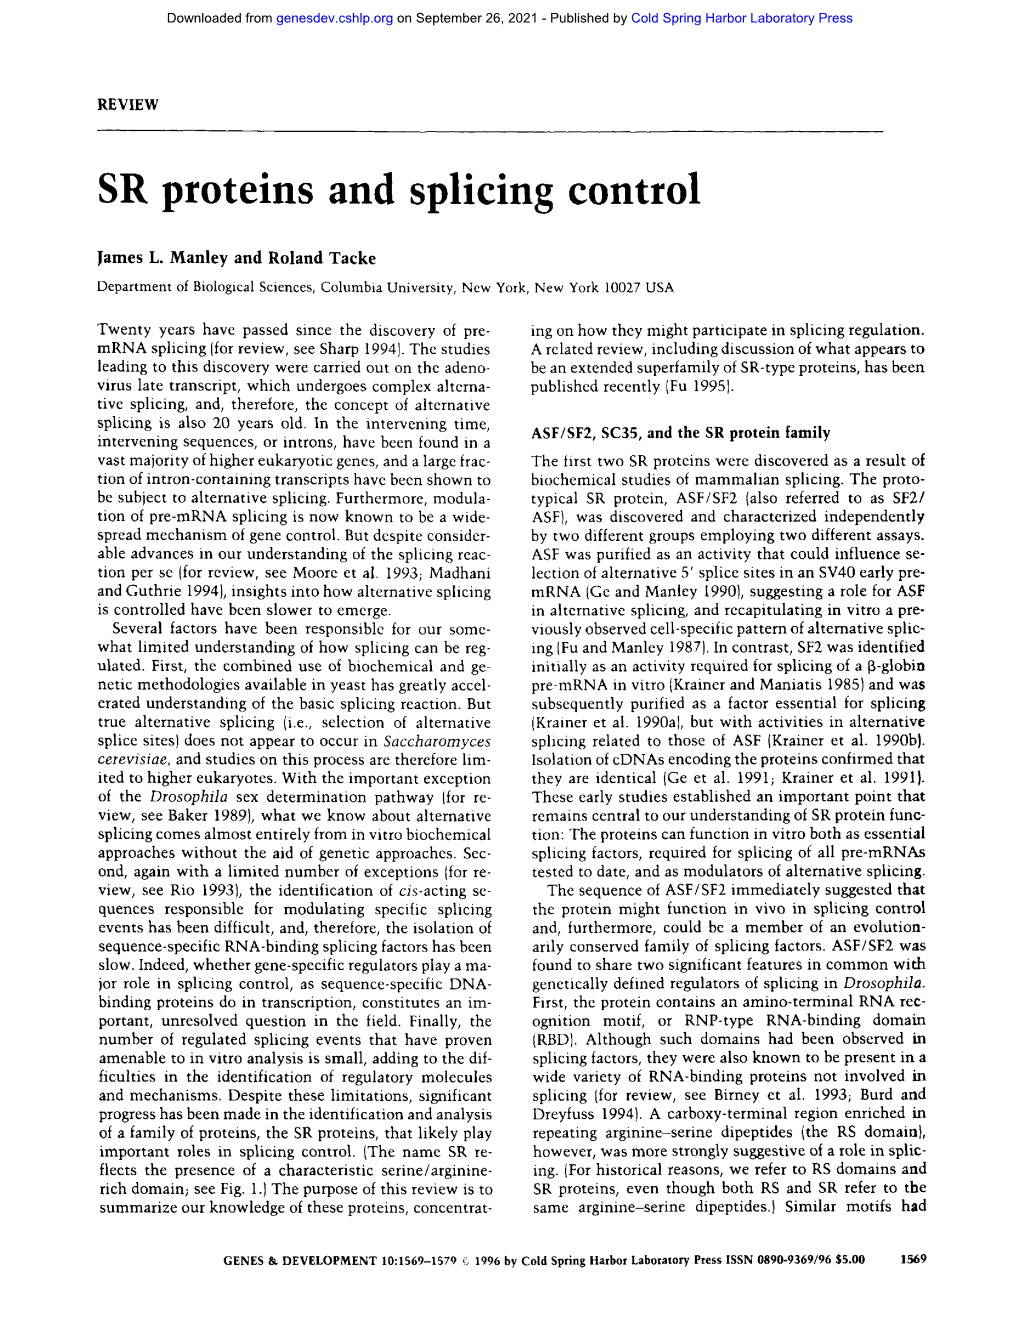 SR Proteins and Splicing Control